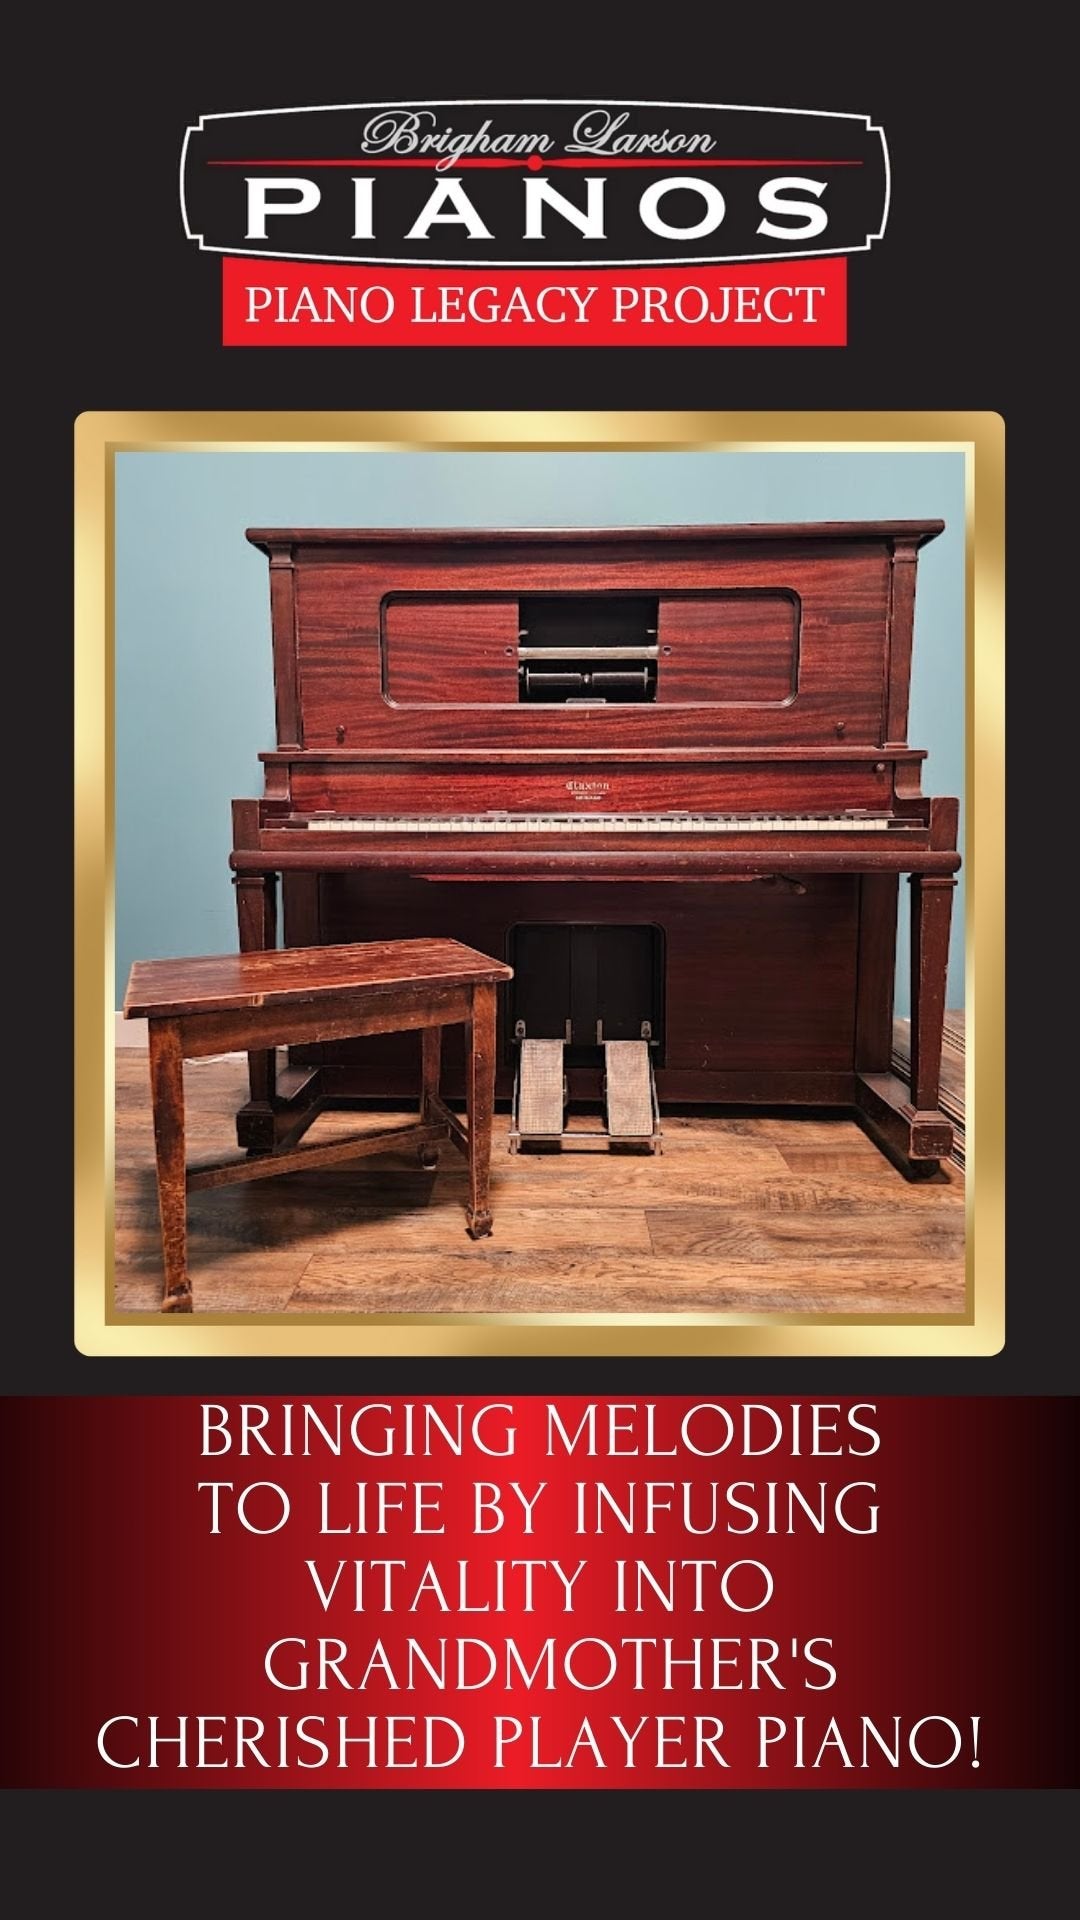 Image 2 of The Hill Family Piano!